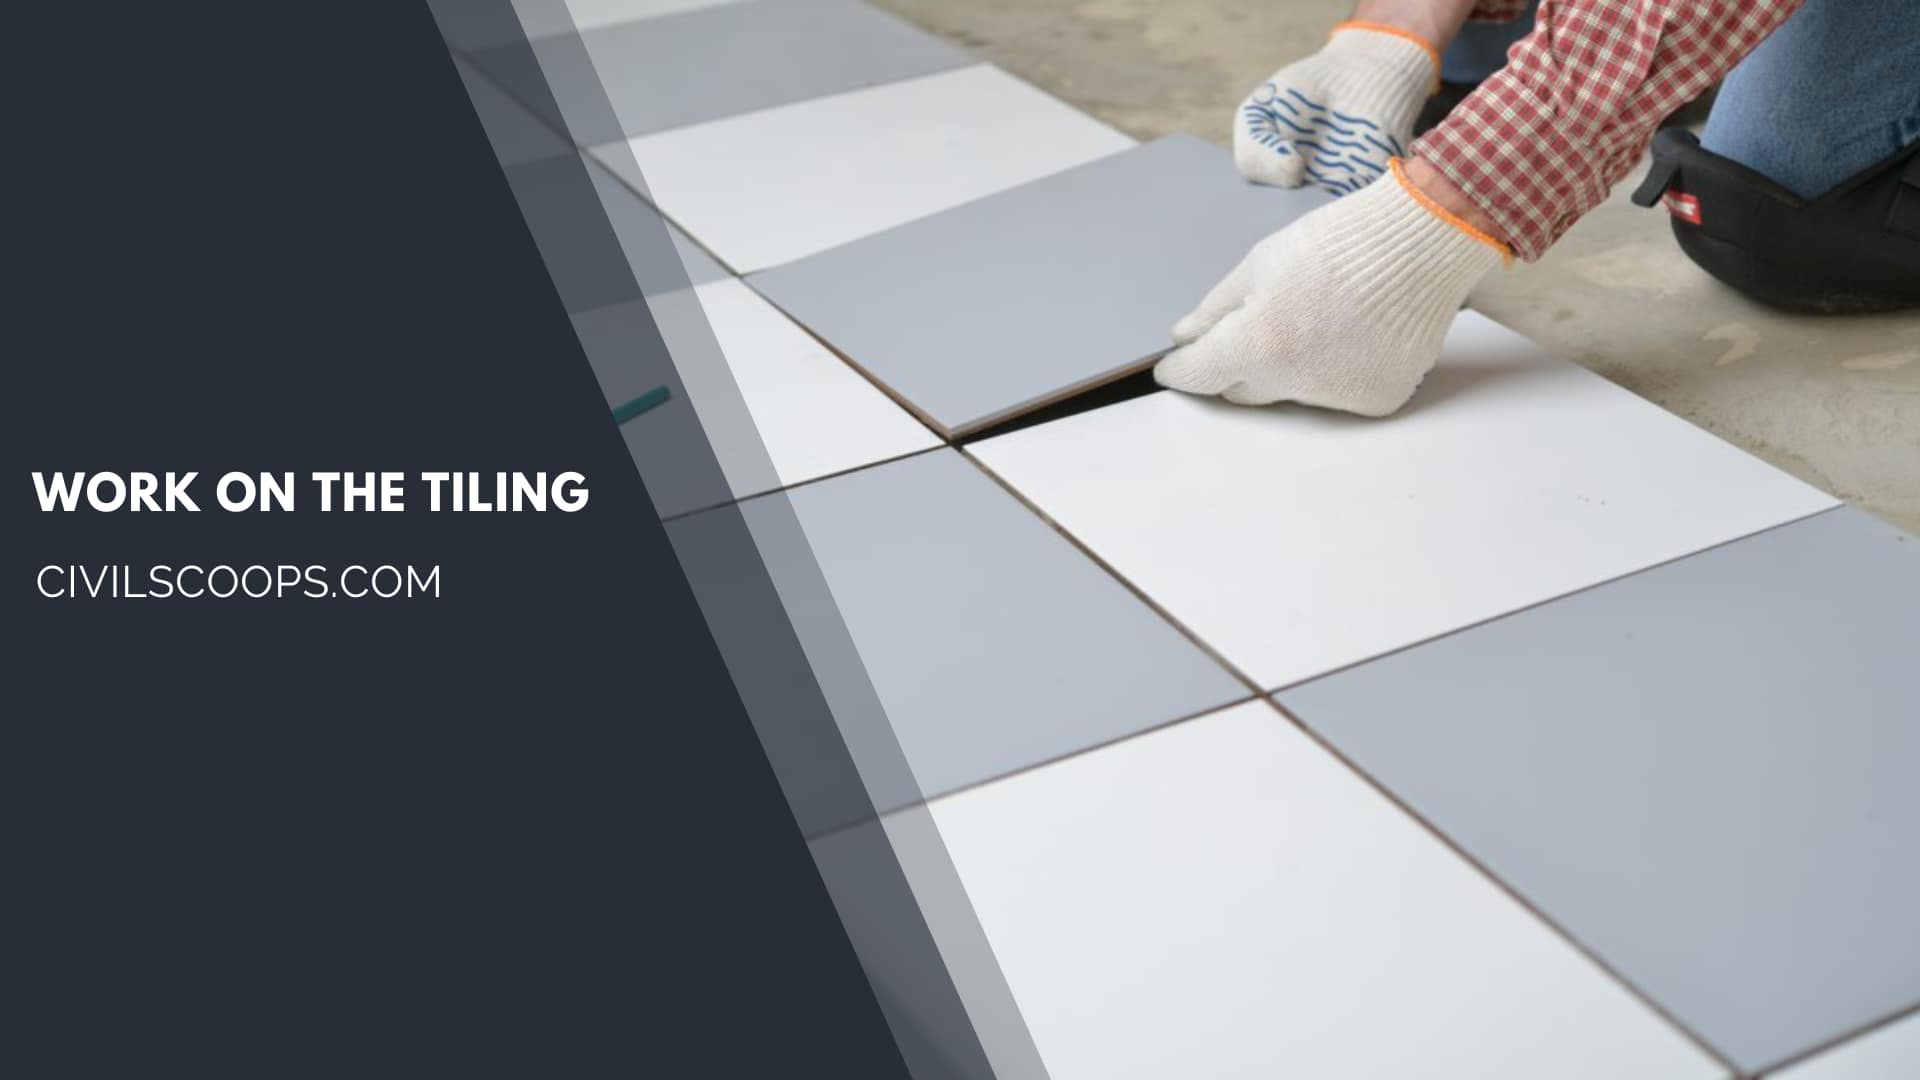 Work on the Tiling